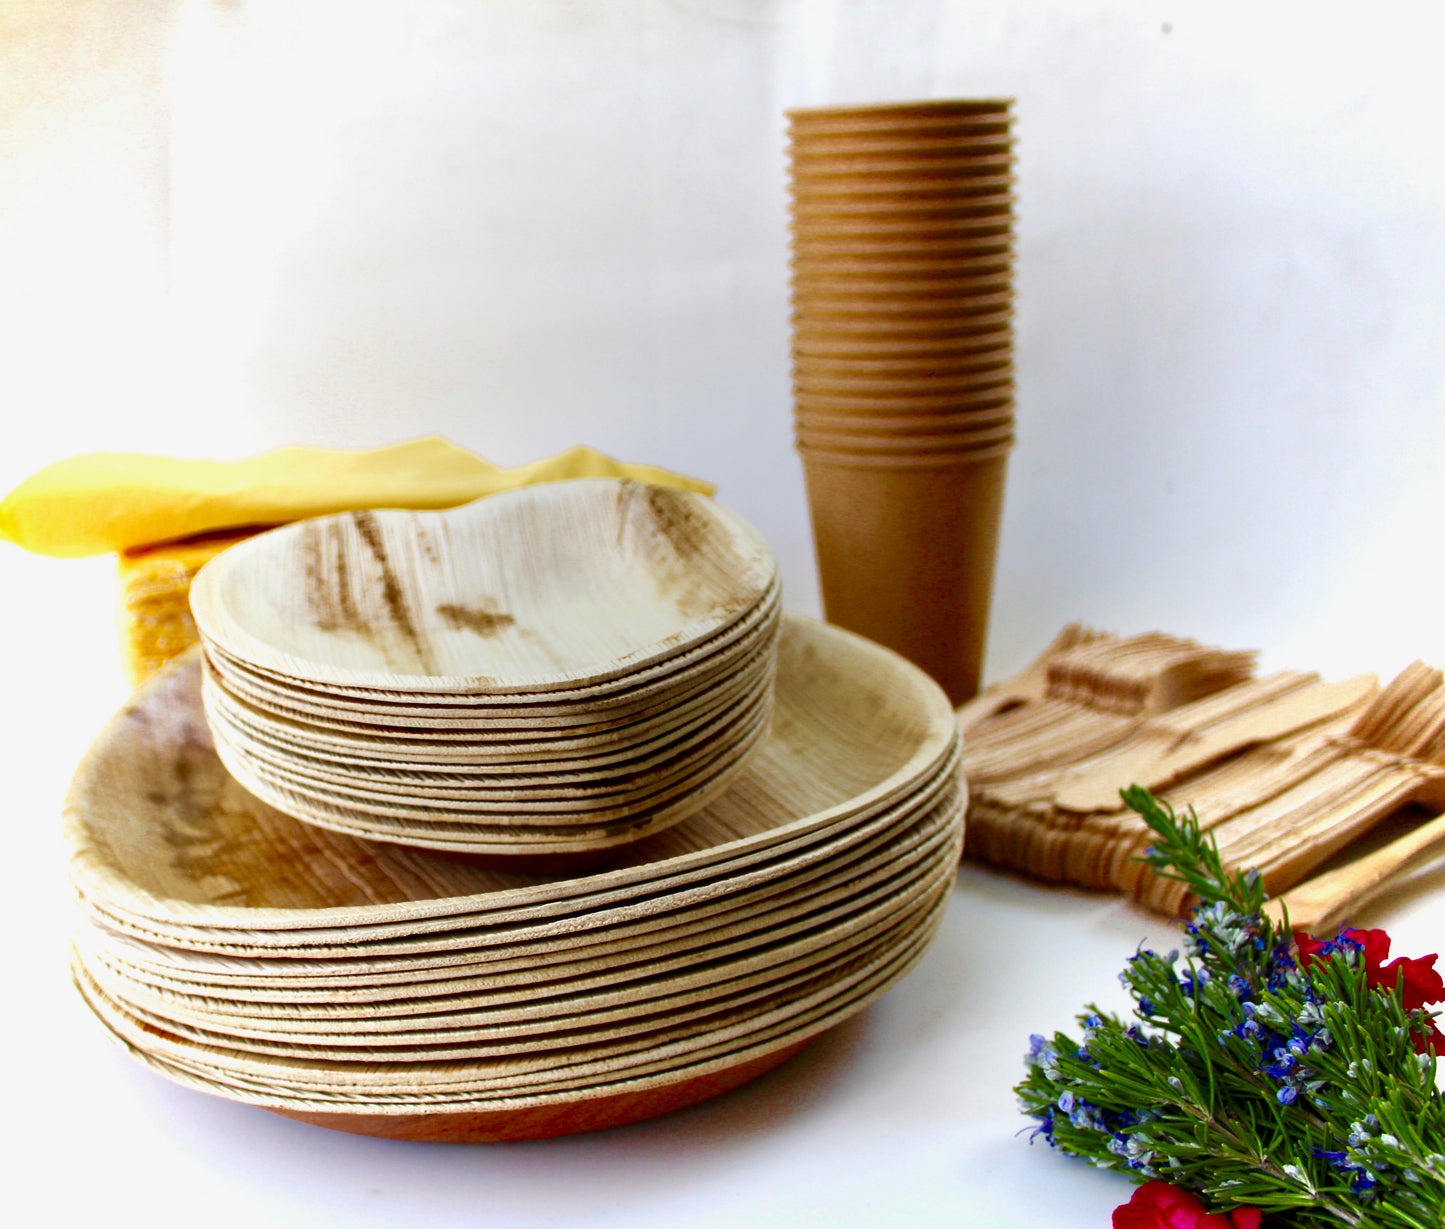 Copy of Bamboo Type Palm Leaf 25 Pic 10" Round  - 25 pice  Square deep 6"- 25  pic  cup  - 75 pic Cutlery - 50 Pic Napkin